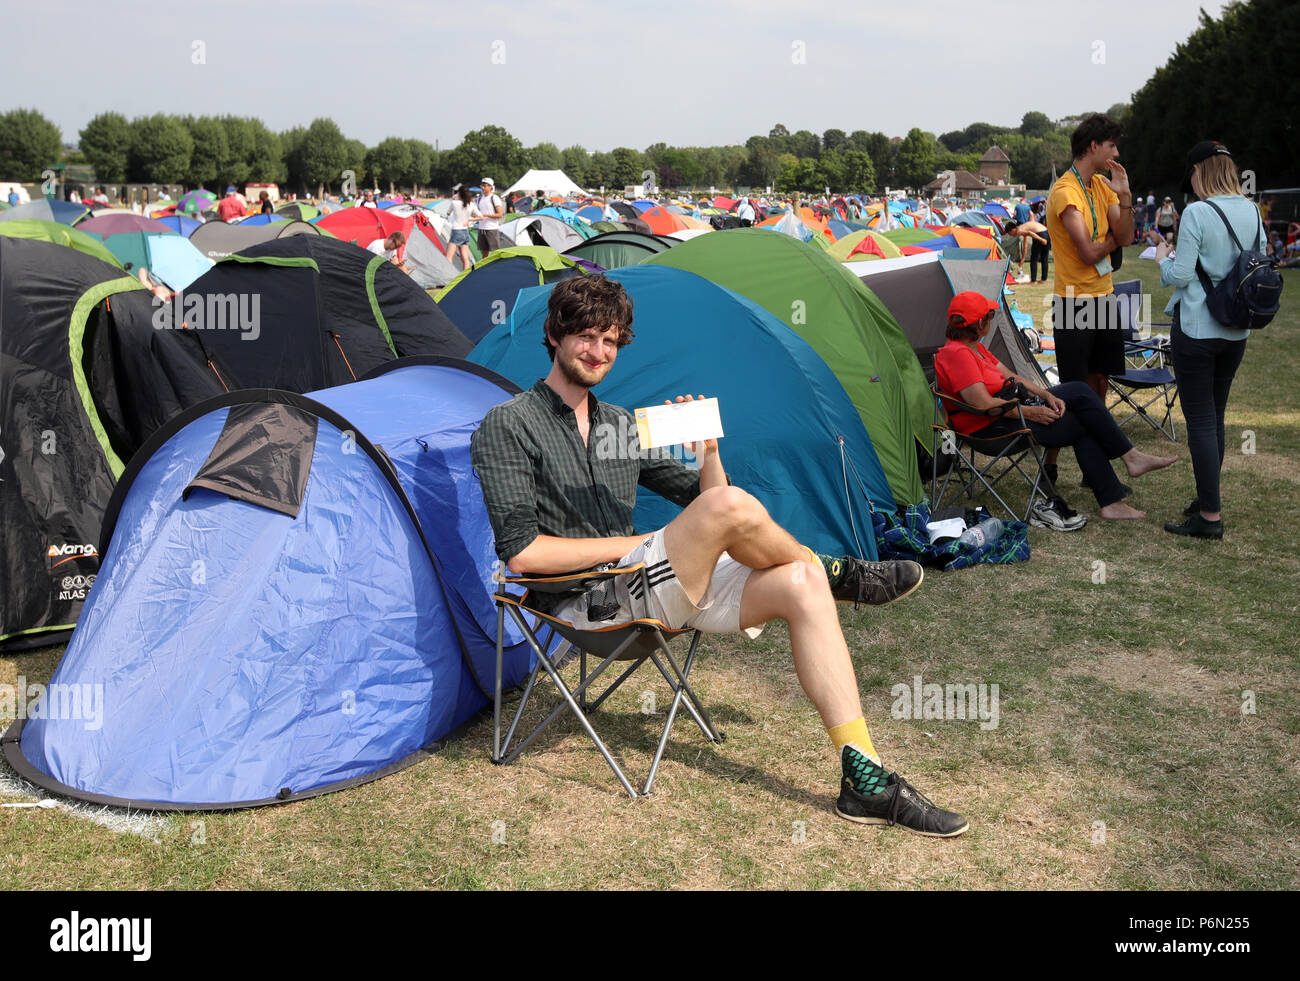 Darius Platt-Vowles from Gloucestershire is first in the queue ahead of the 2018 Wimbledon Championships at The All England Lawn Tennis and Croquet Club, Wimbledon.at the All England Lawn Tennis and Croquet Club, Wimbledon. Stock Photo